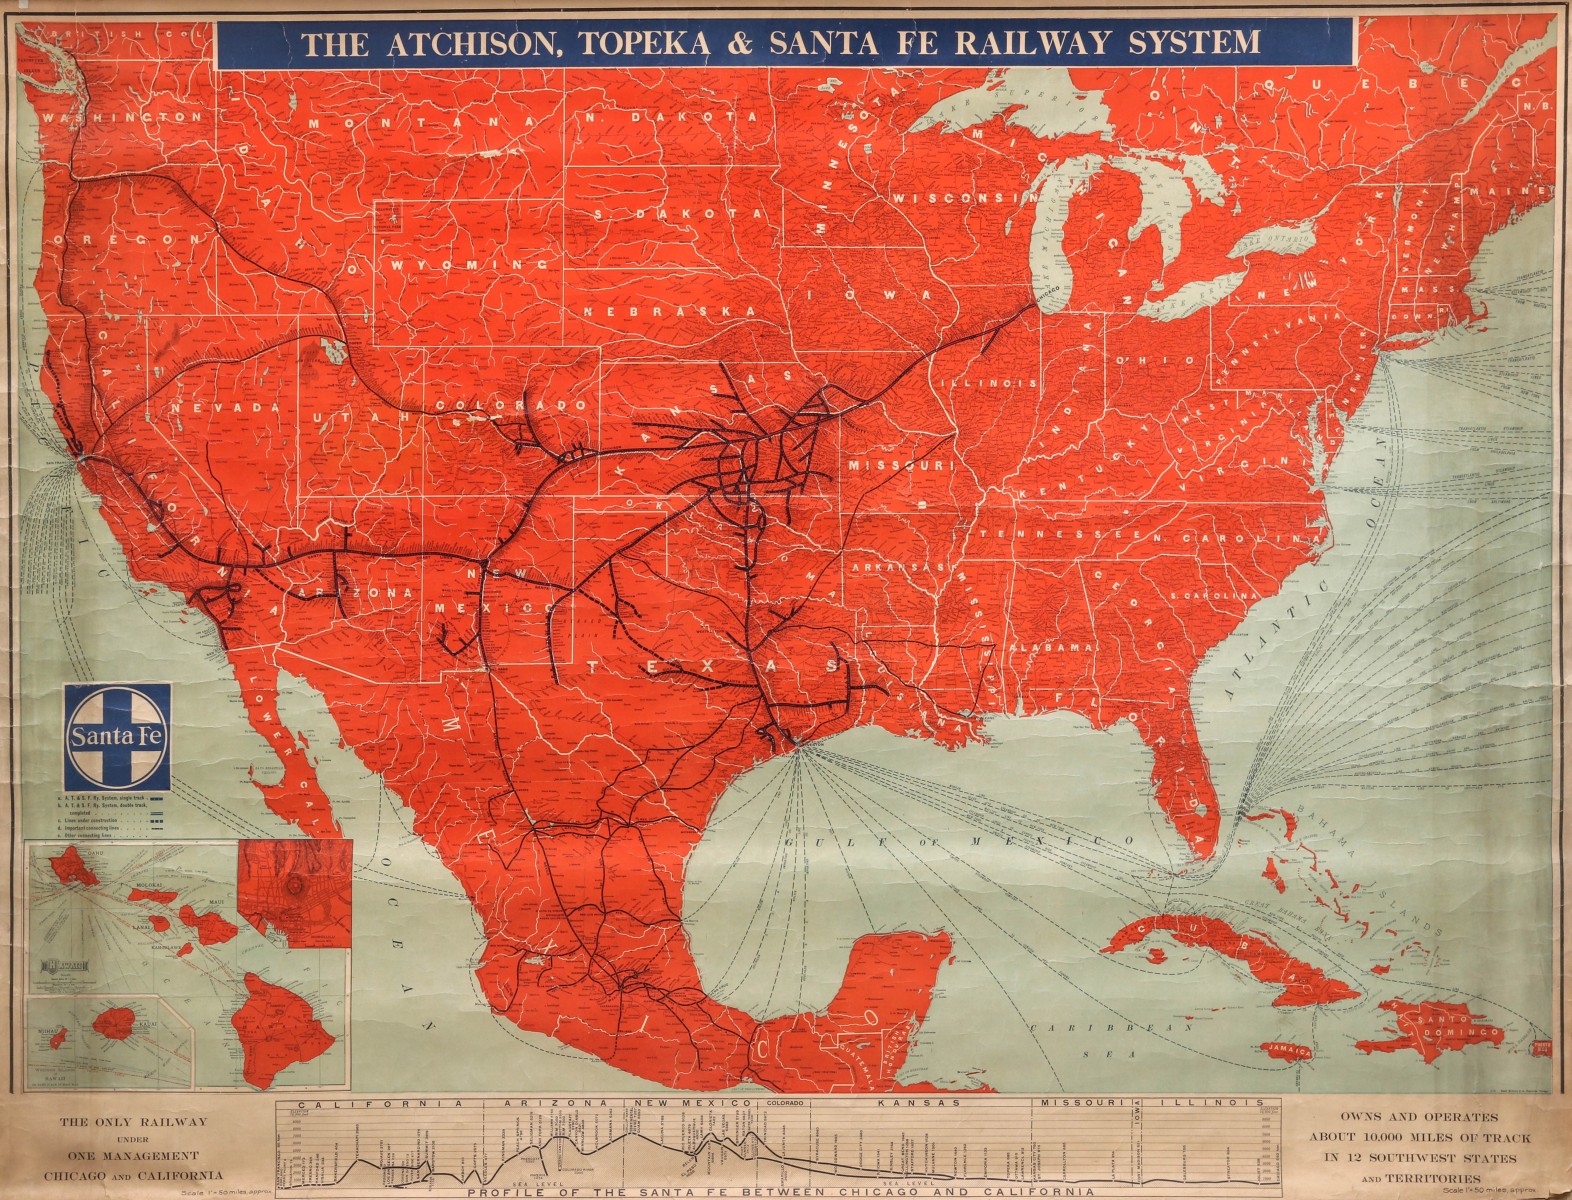 AN ATCHISON, TOPEKA AND SANTA FE WALL MAP DATED 1910